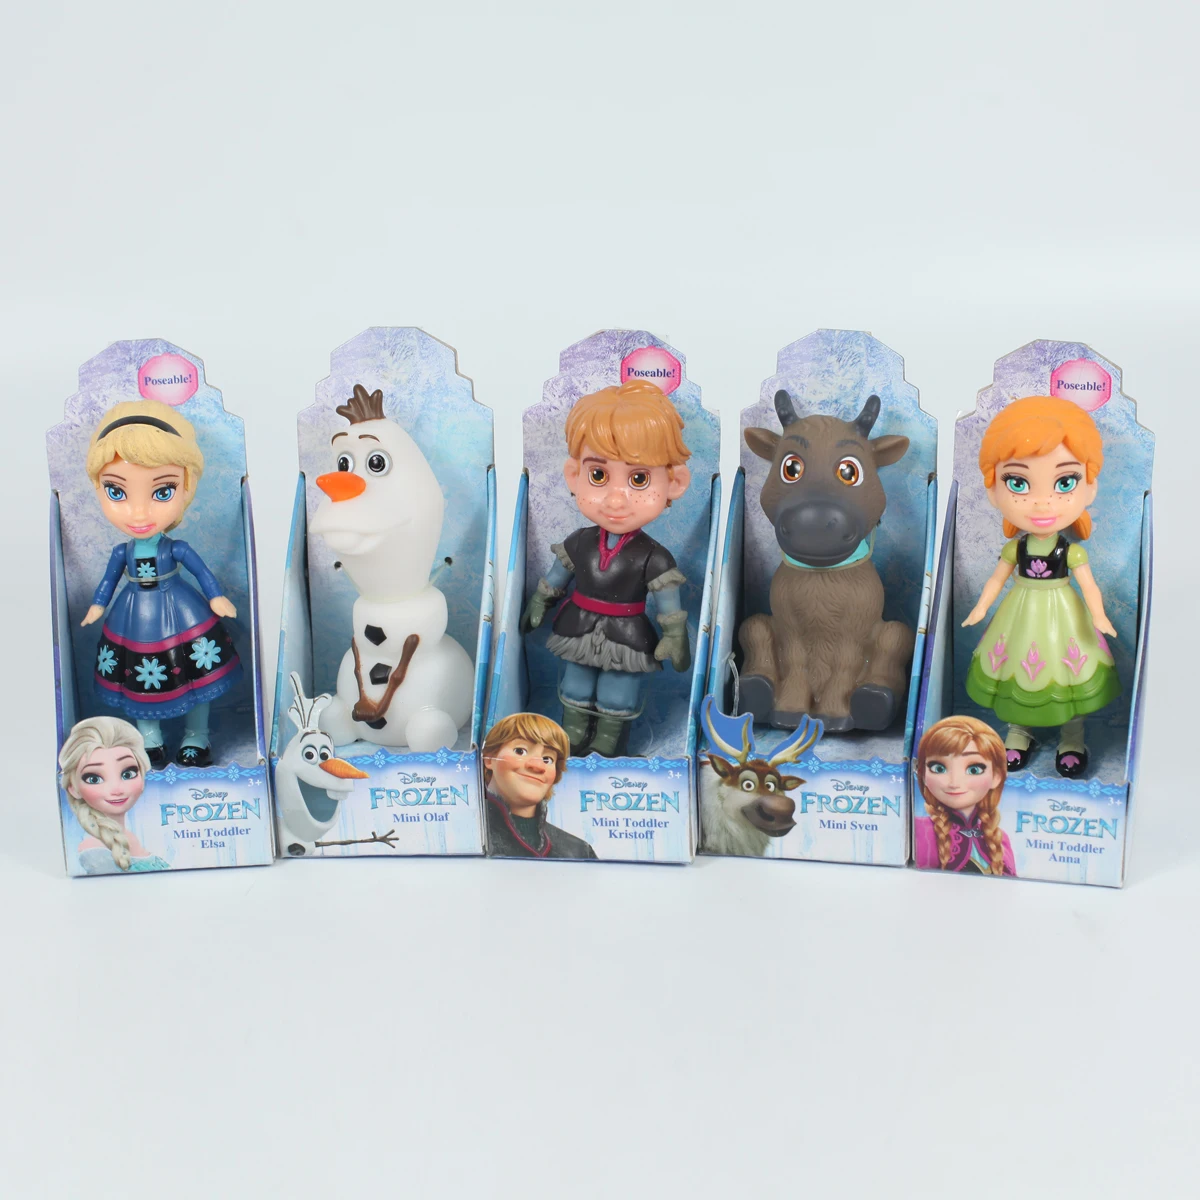 Disney Frozen Mini Toddler Elsa Anna Kirstoff Olaf Sven Kawaii Cute Doll Gifts Toy Model Anime Figures Collect Ornaments